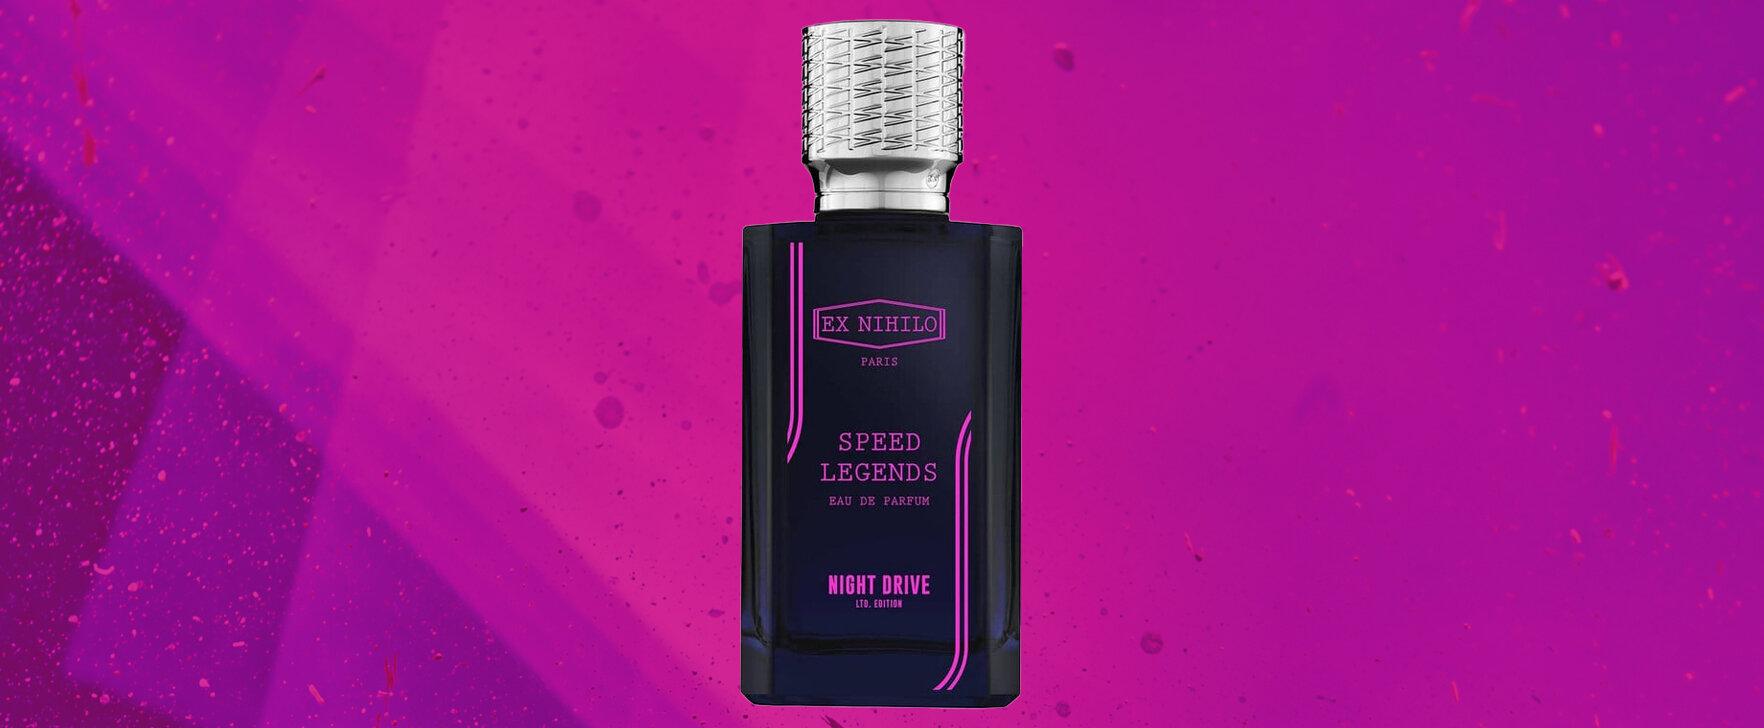 Midnight Rush: The New Limited Edition Fragrance Speed Legends Night Drive by Ex Nihilo